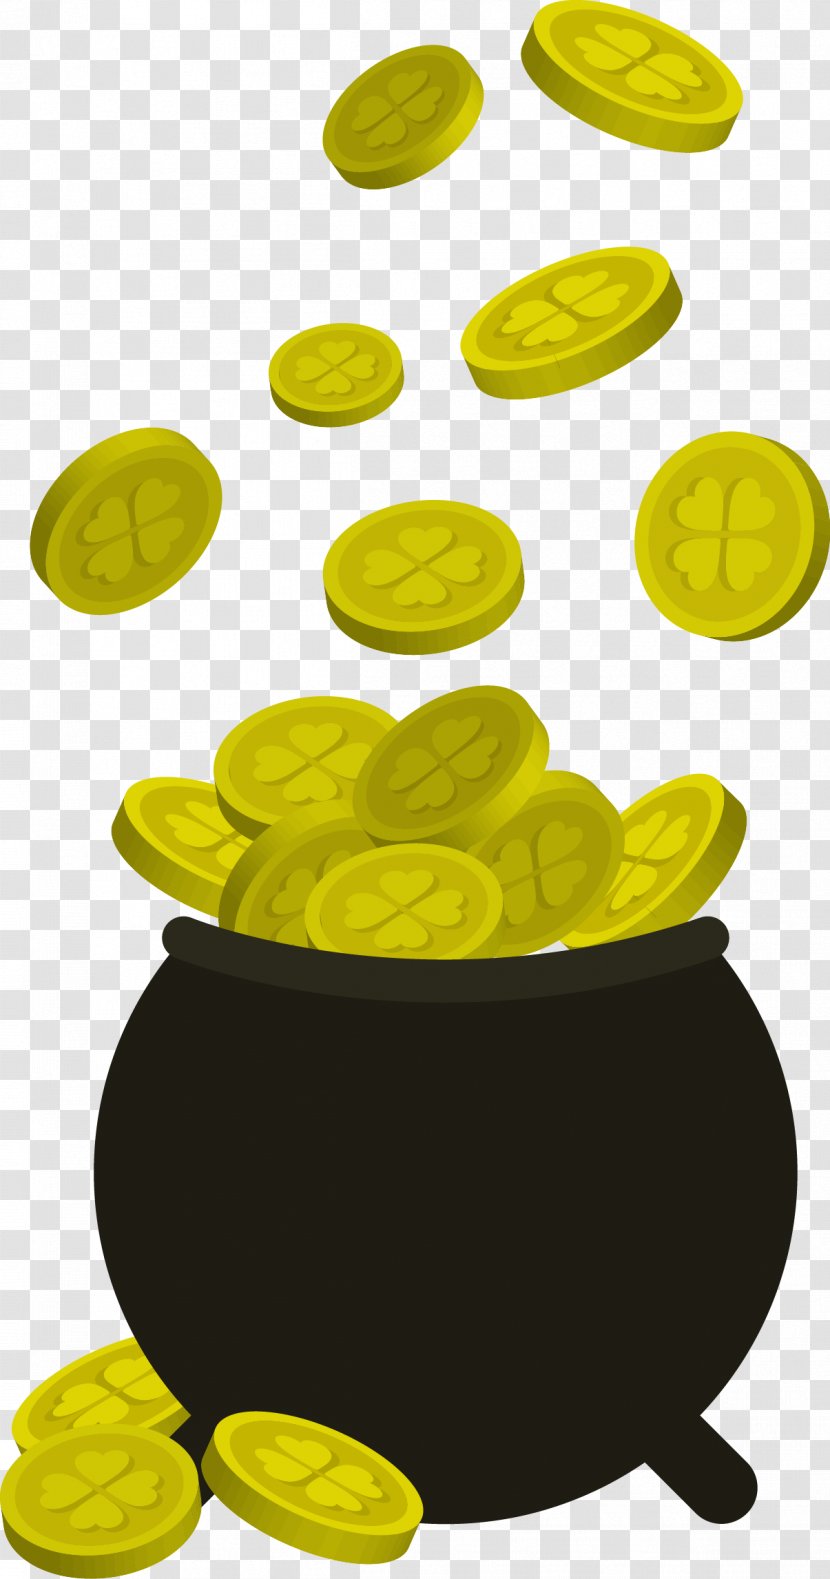 Gold Coin - Vector Flat Bottle Picture Transparent PNG